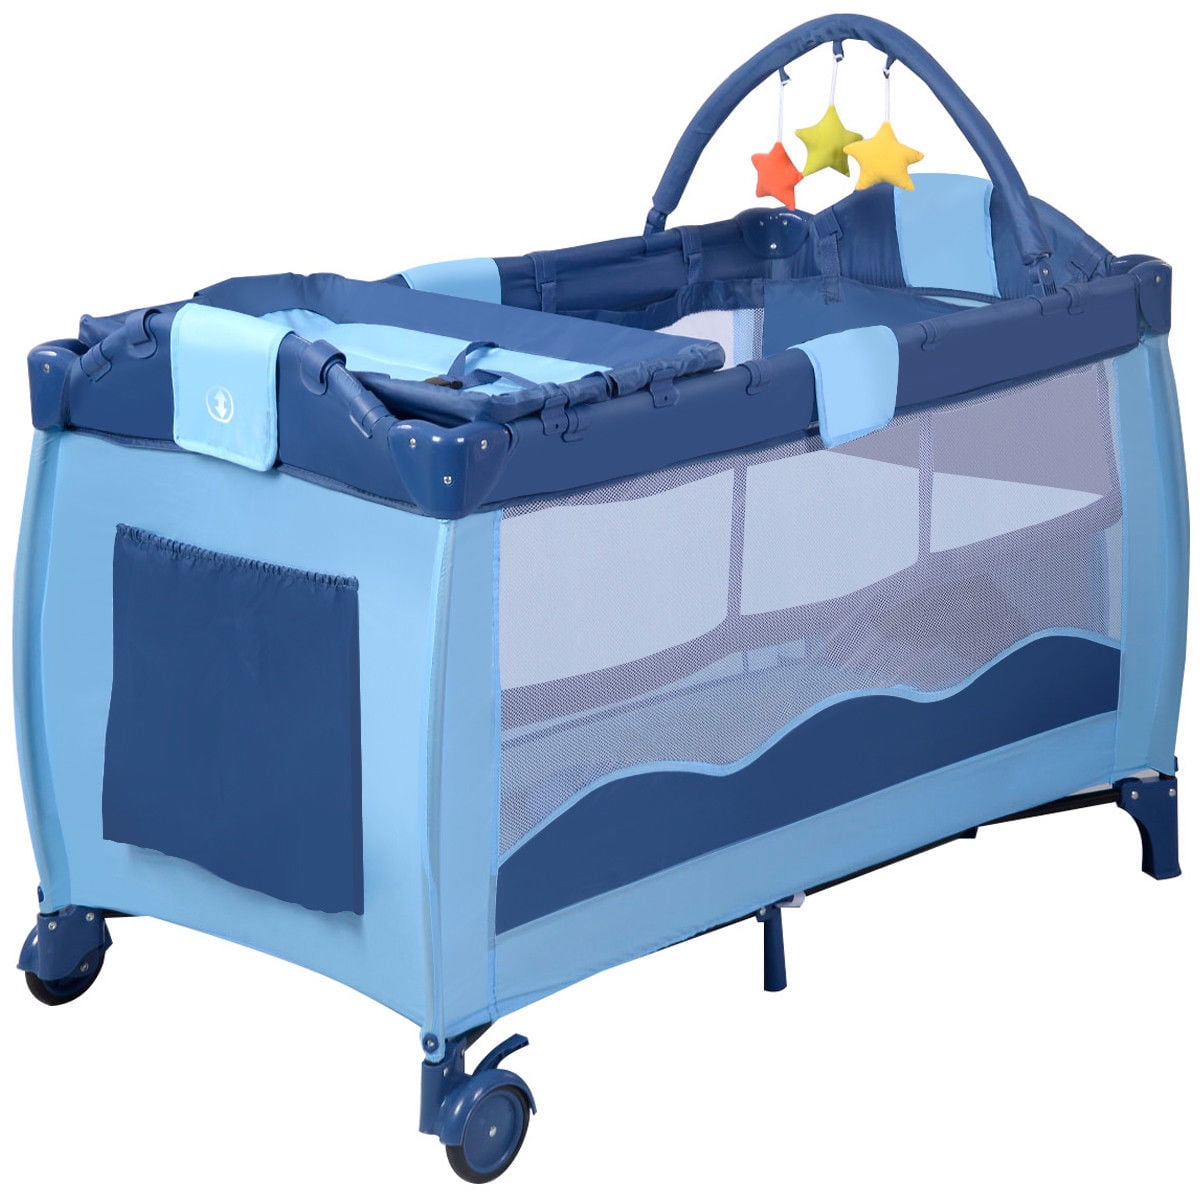 Portable Child Baby Infant Playpen Travel Cot Bed Crawl Play Area new blue 